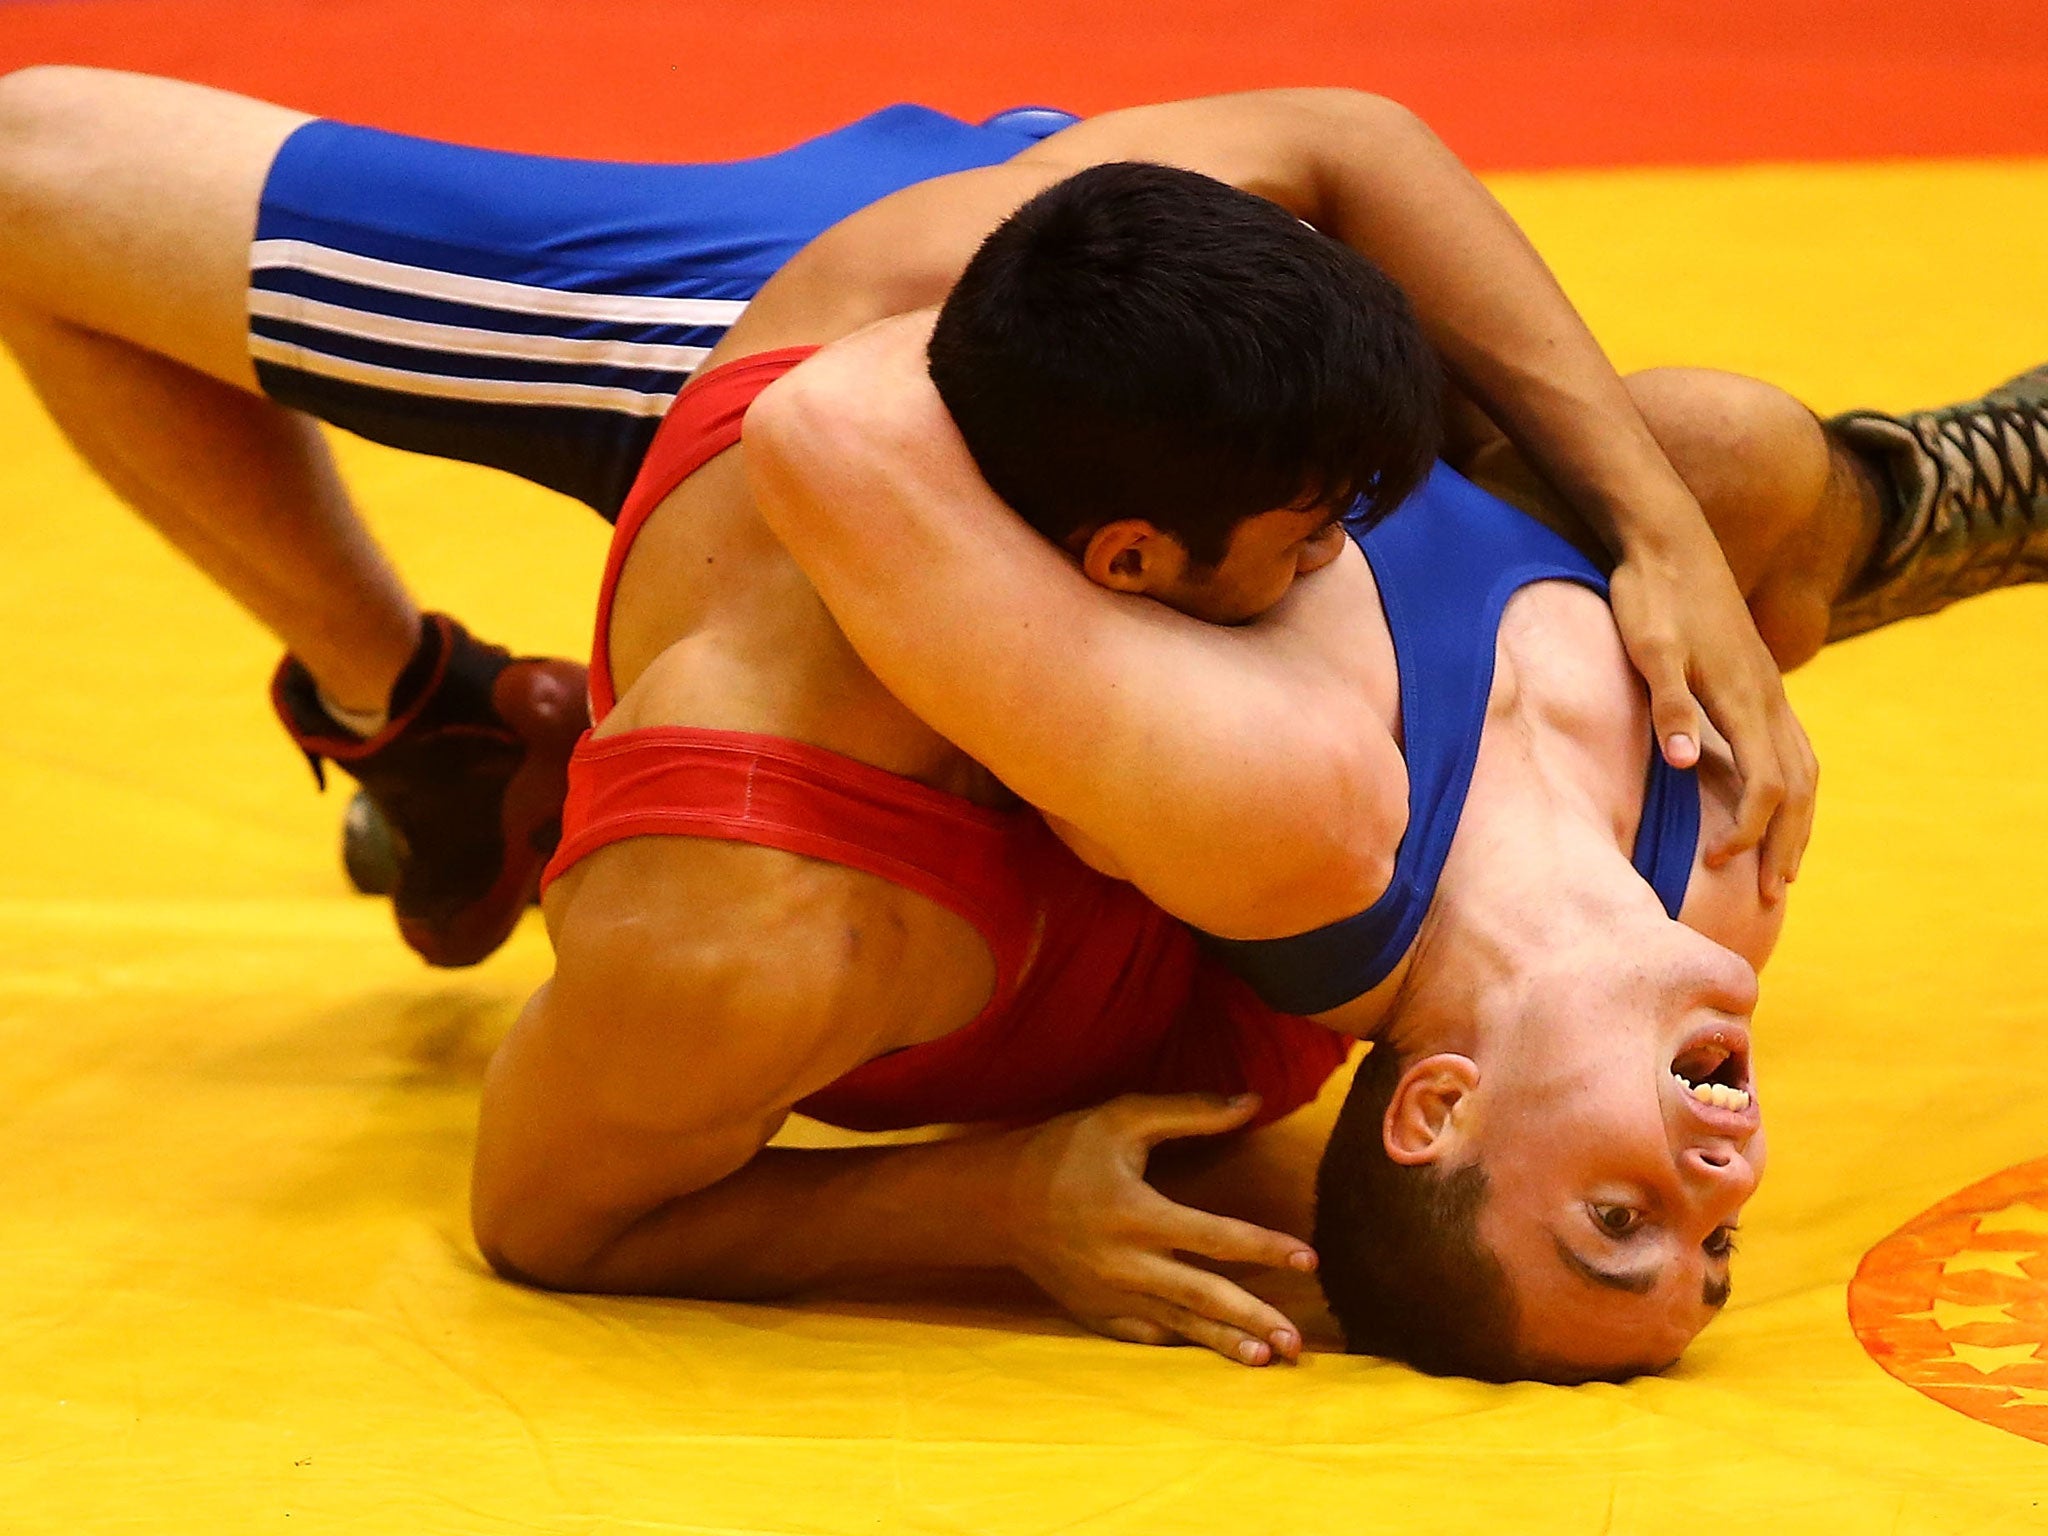 On Tuesday, the executive board of the International Olympic Committee dumped wrestling from its guaranteed berth in future Summer games